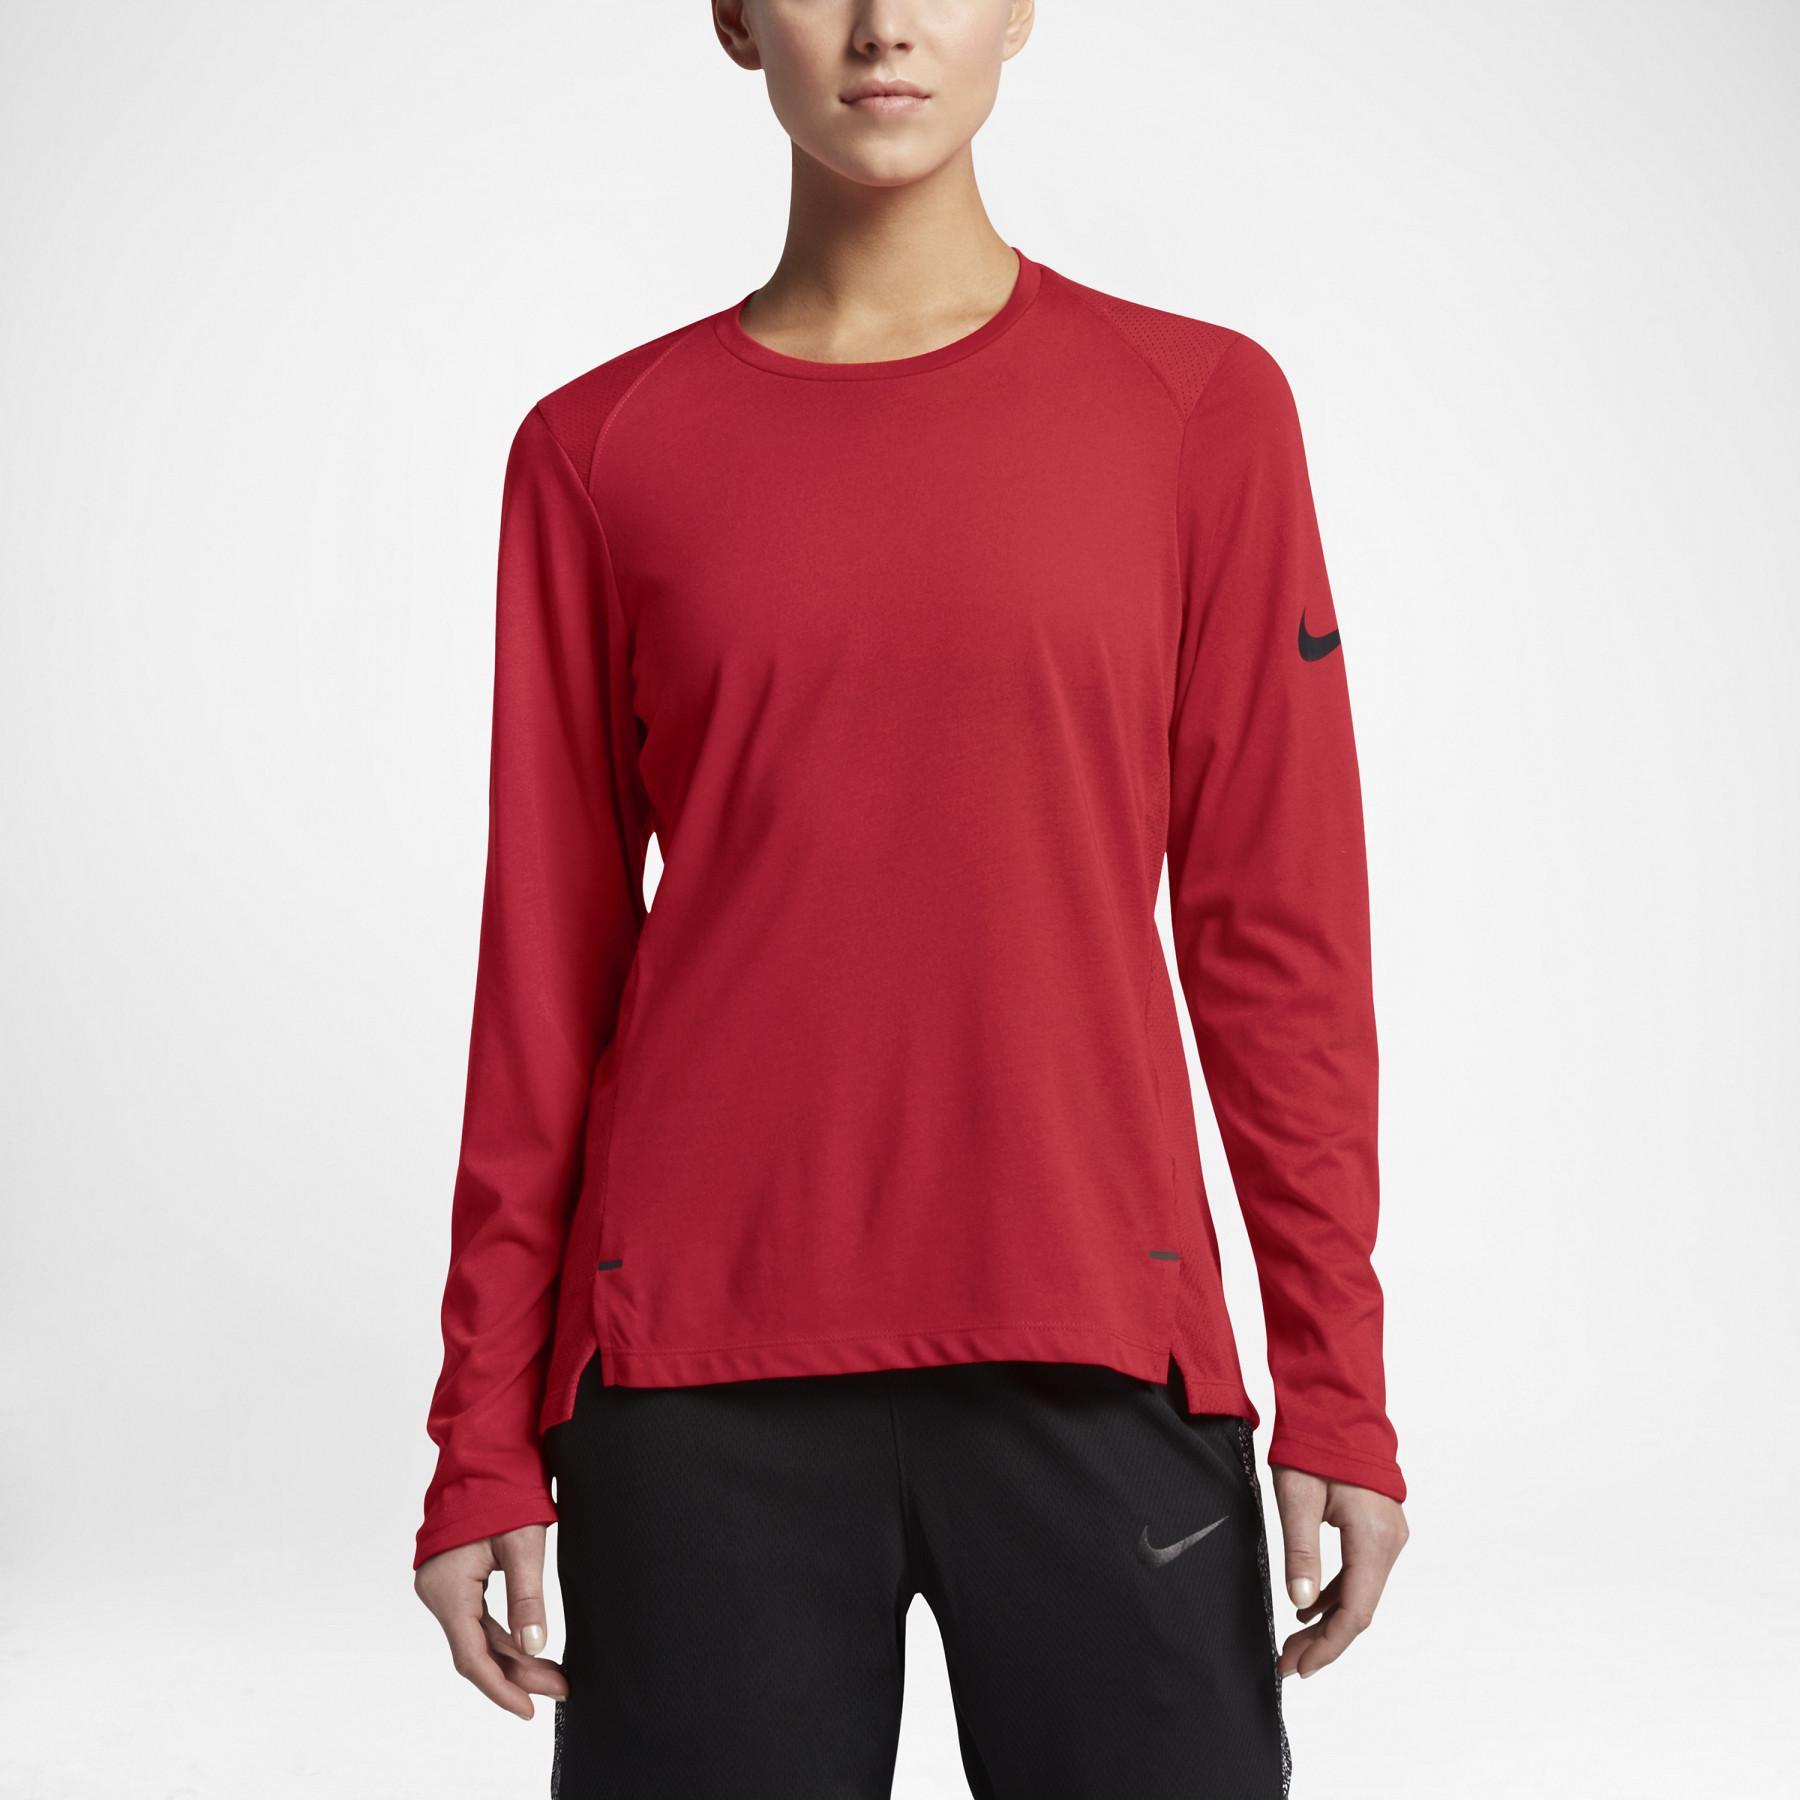 Maillot manches longues femme Nike Dry Elite